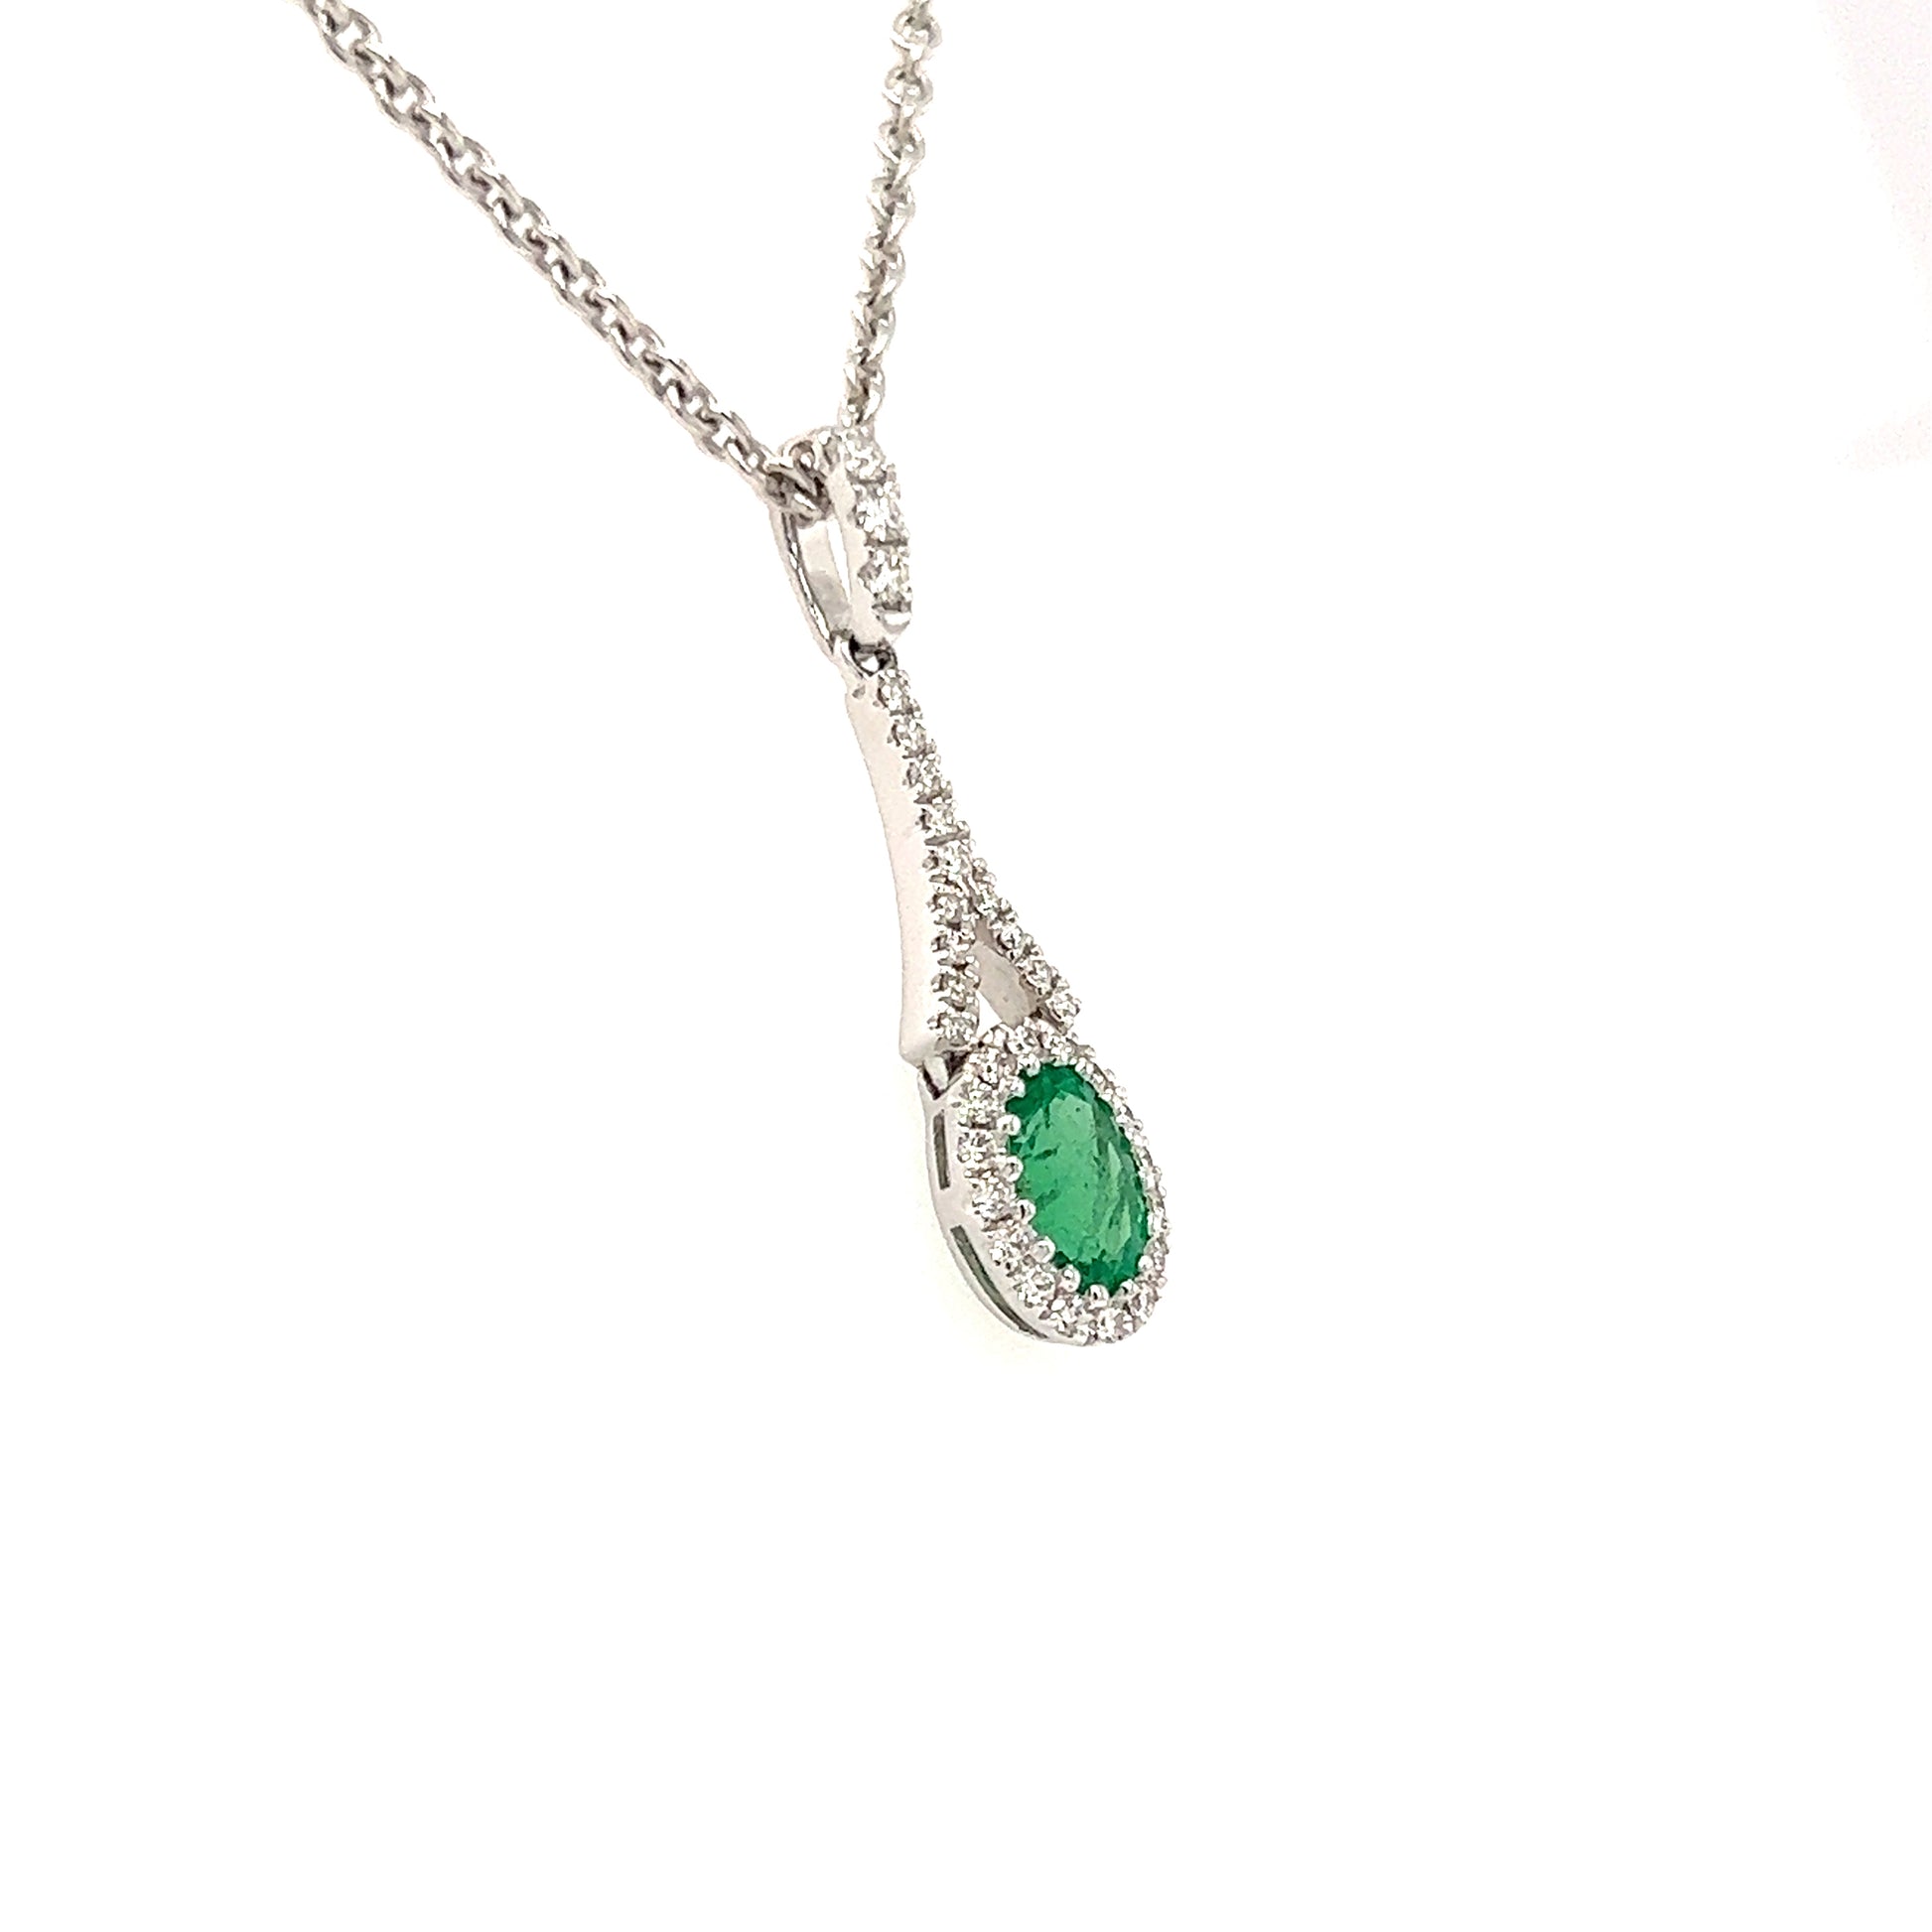 Oval Emerald Pendant with 32 Diamonds in 18K White Gold Right Side View